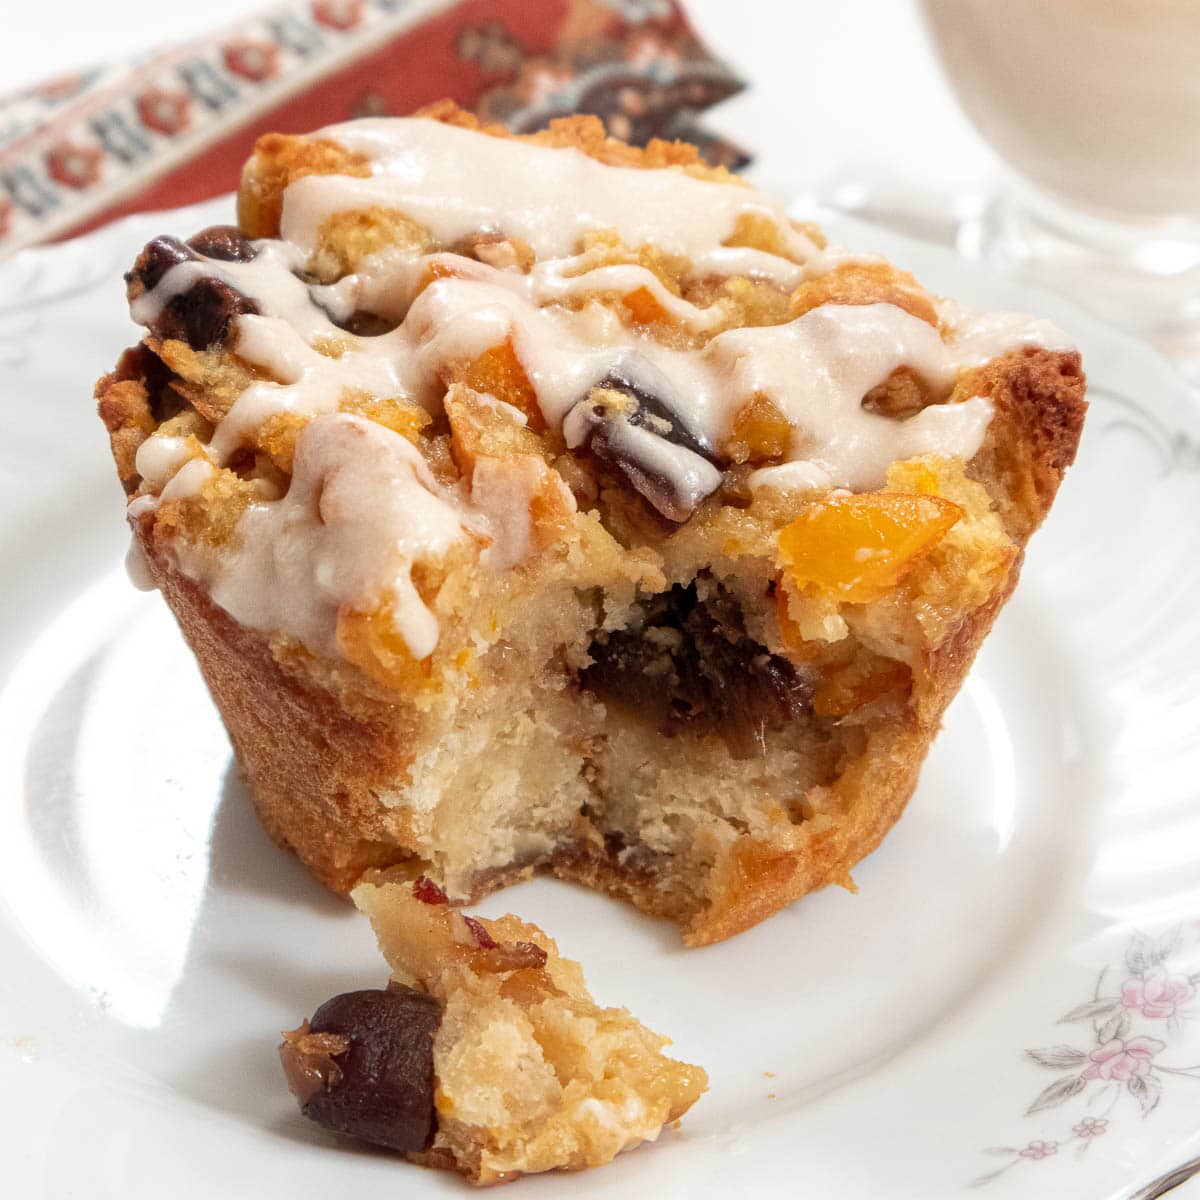 Orange Date Bread Pudding with Hard Sauce drizzled on